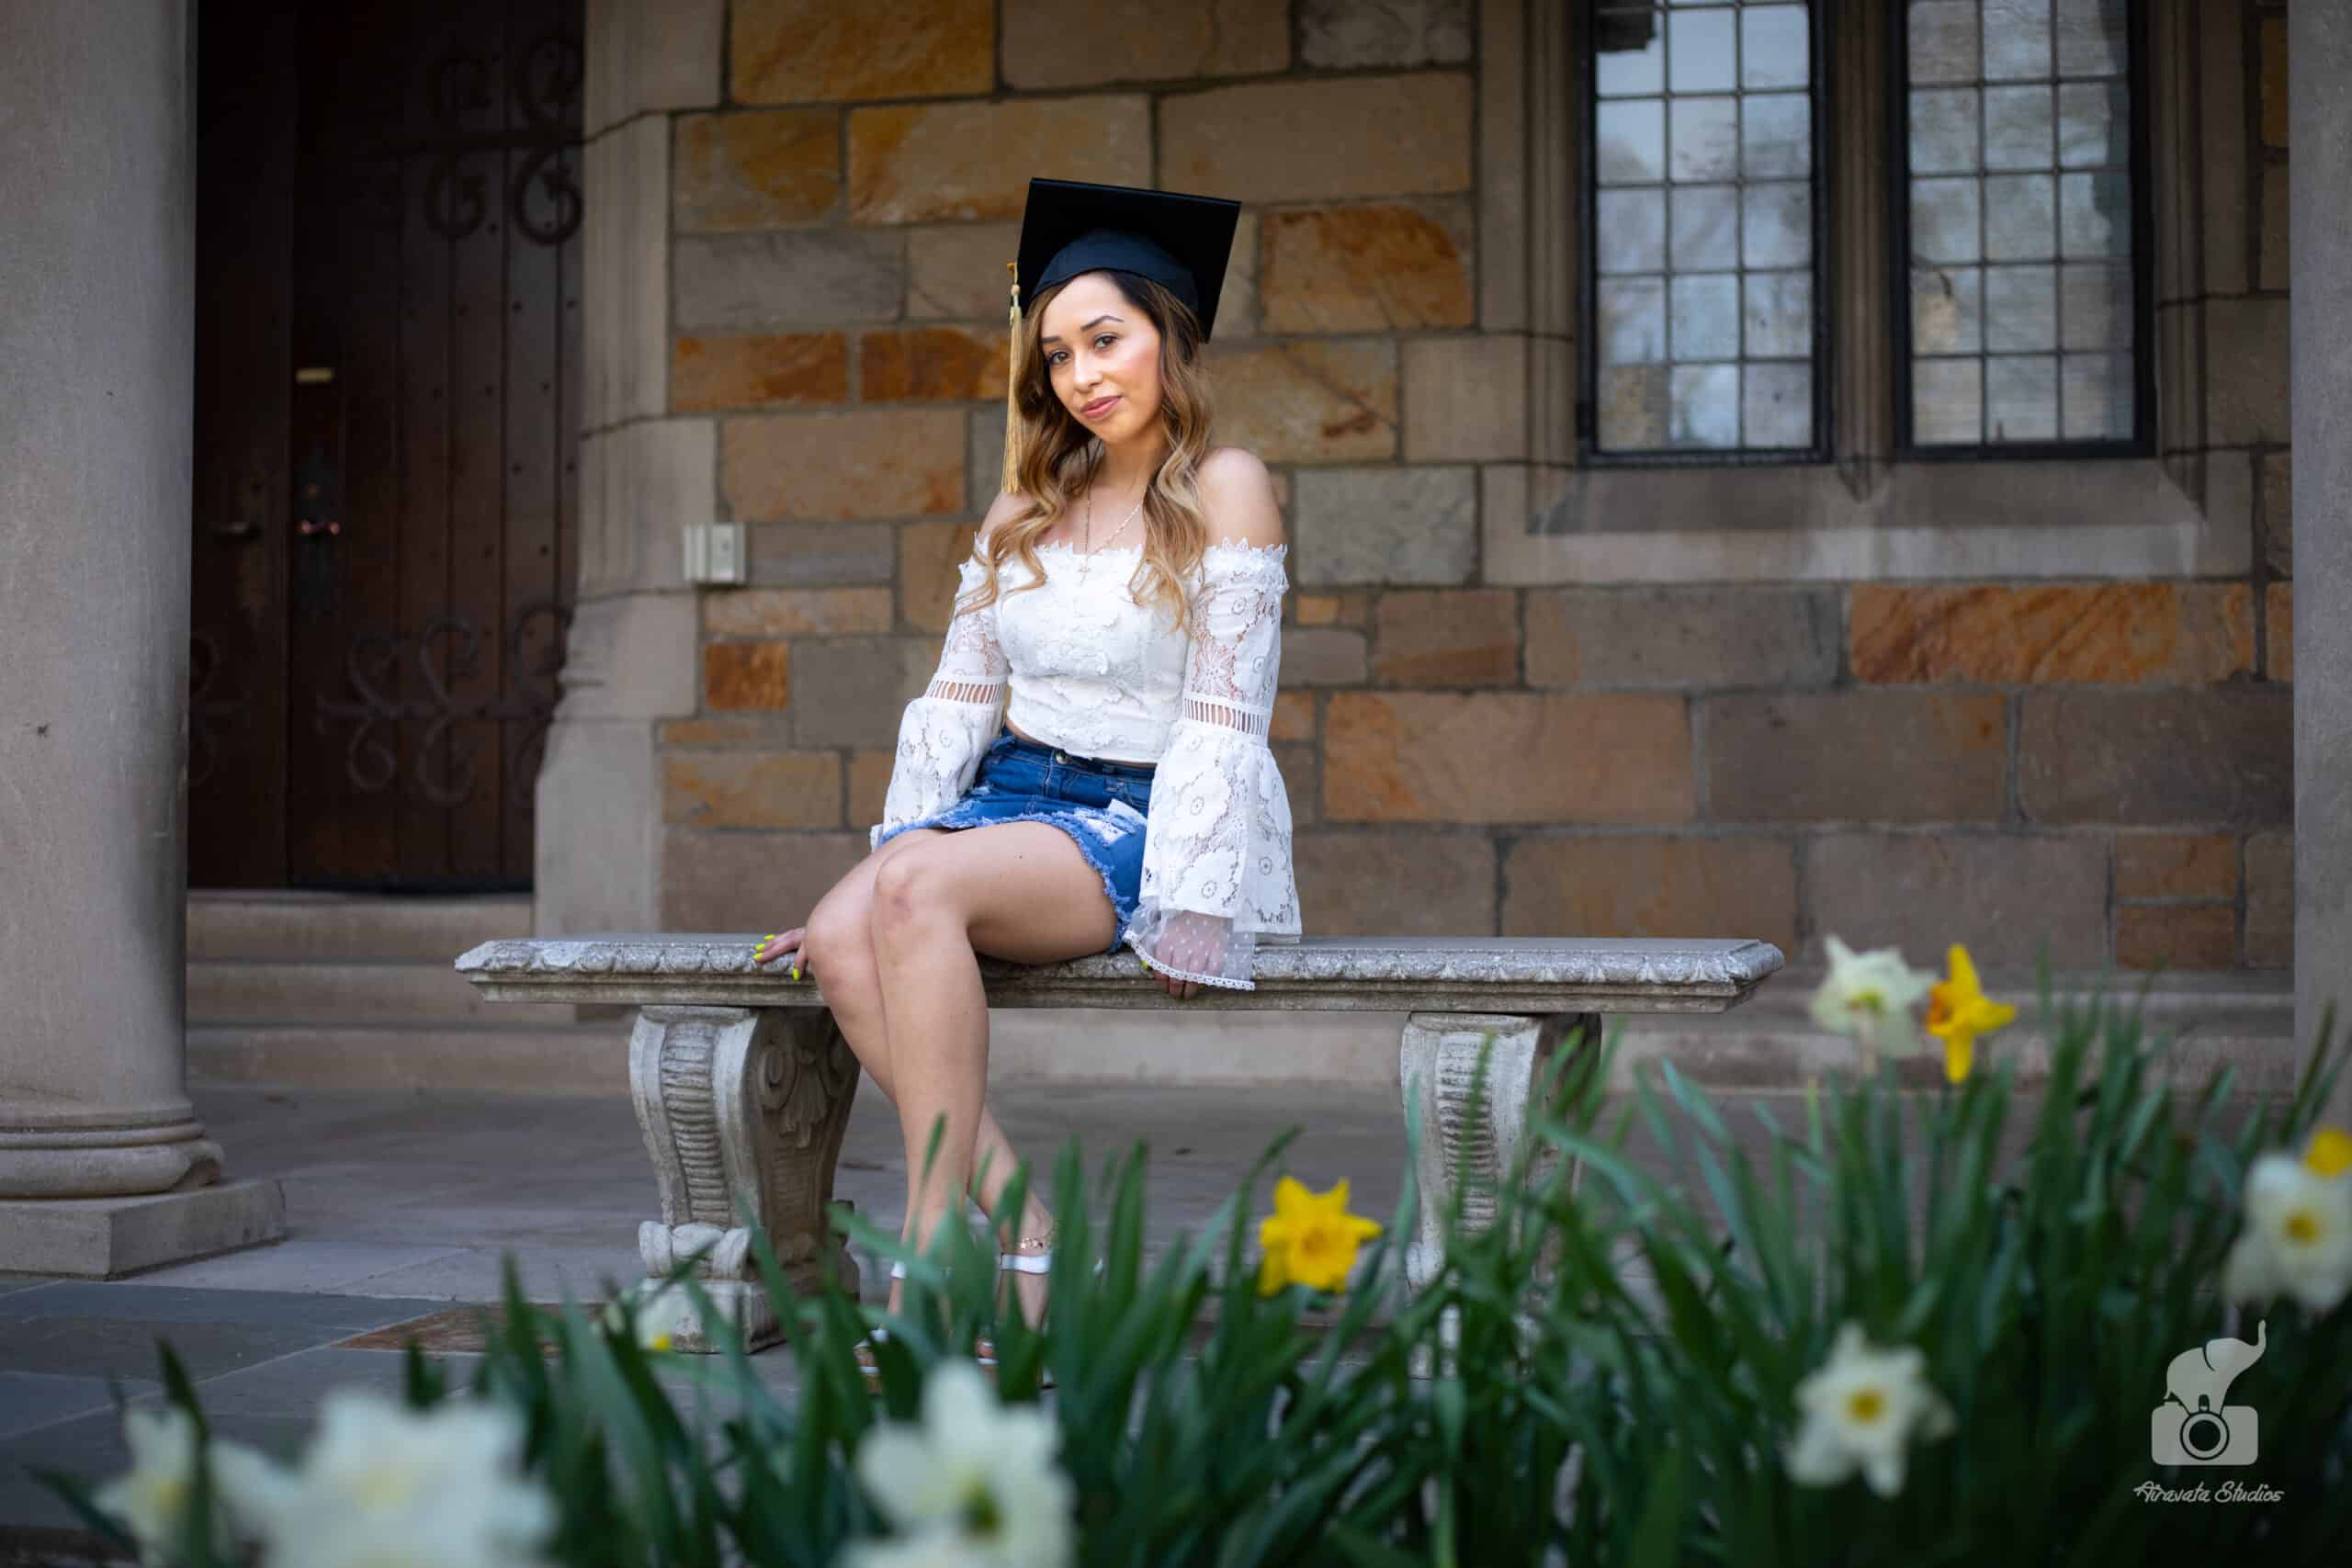 Getting Ready for Graduation? Eight Tips to Prepare for the Perfect Photo Shoot